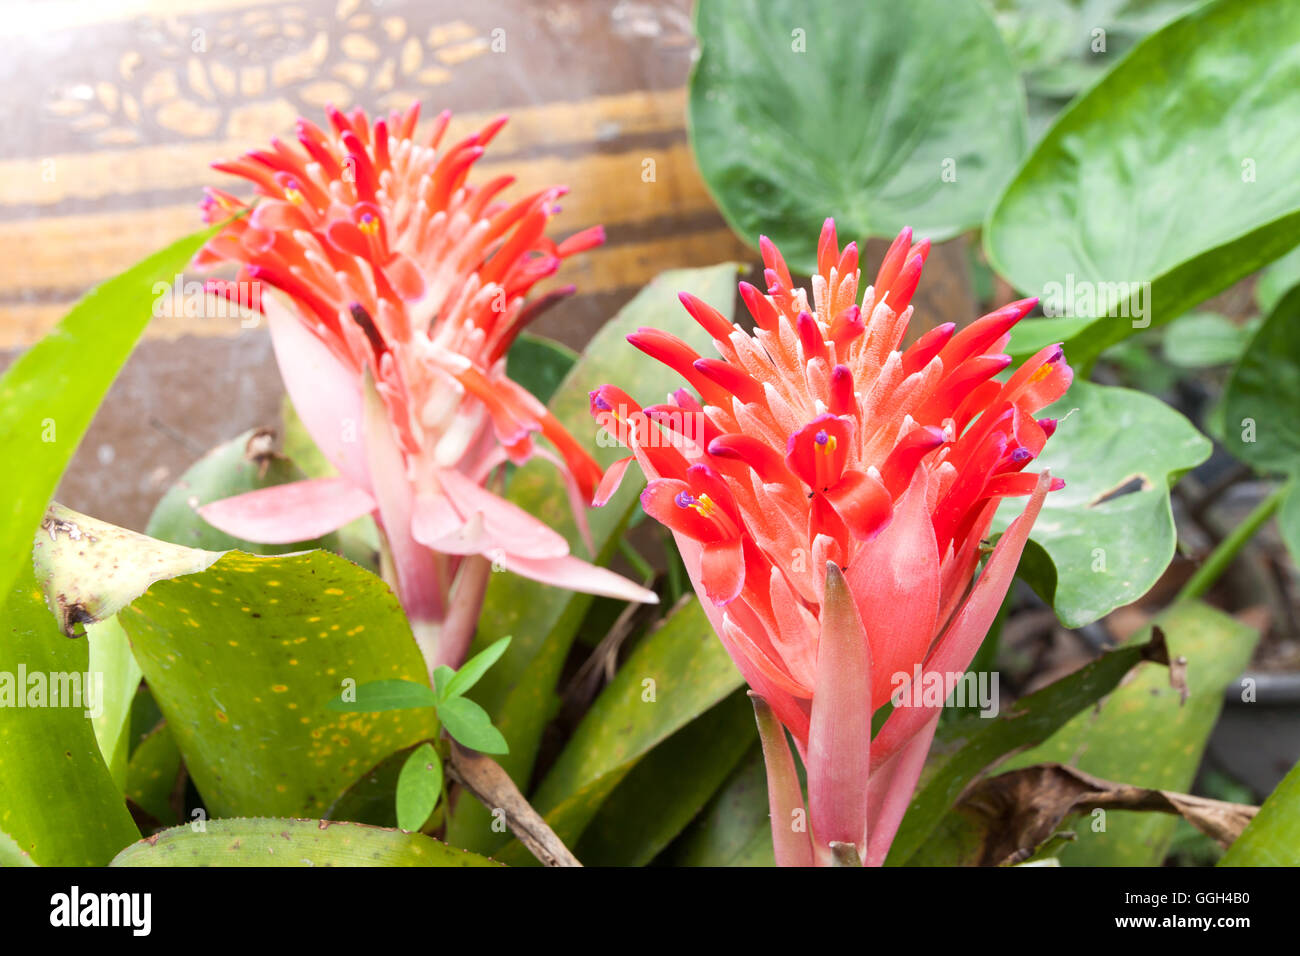 Billbergia Kyoto Bromeliad flowering and ornamental plants. ornamental red color a flowering plant Stock Photo